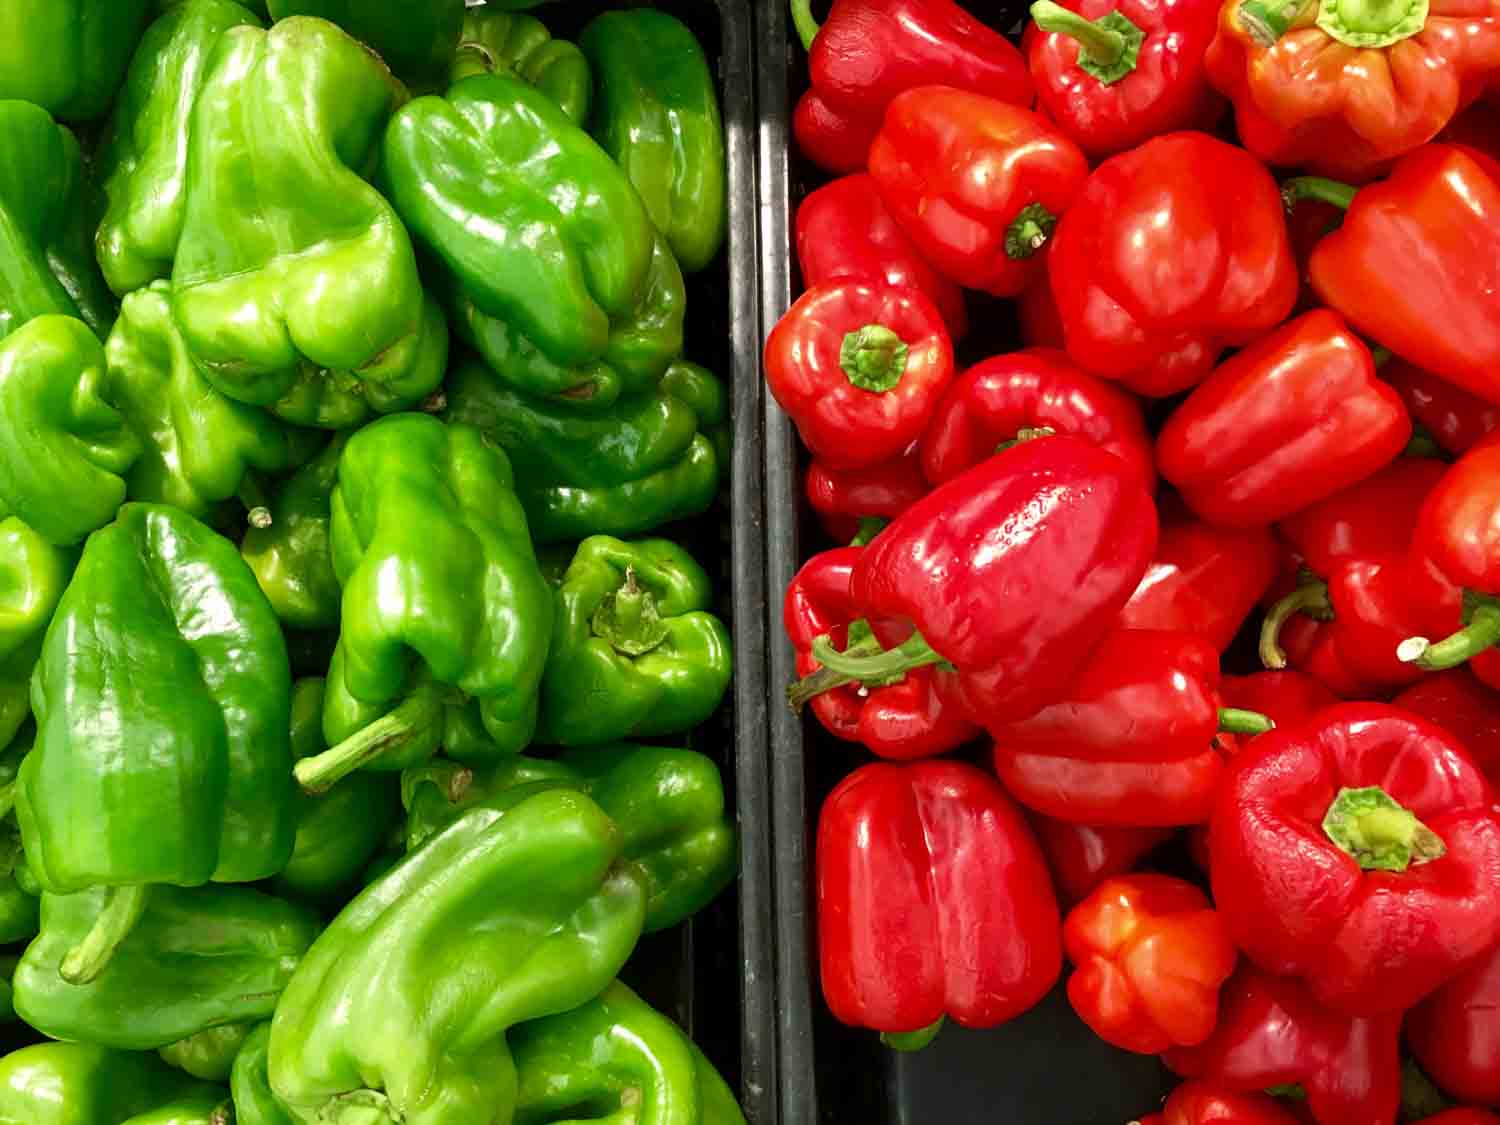 Green and red bell peppers together